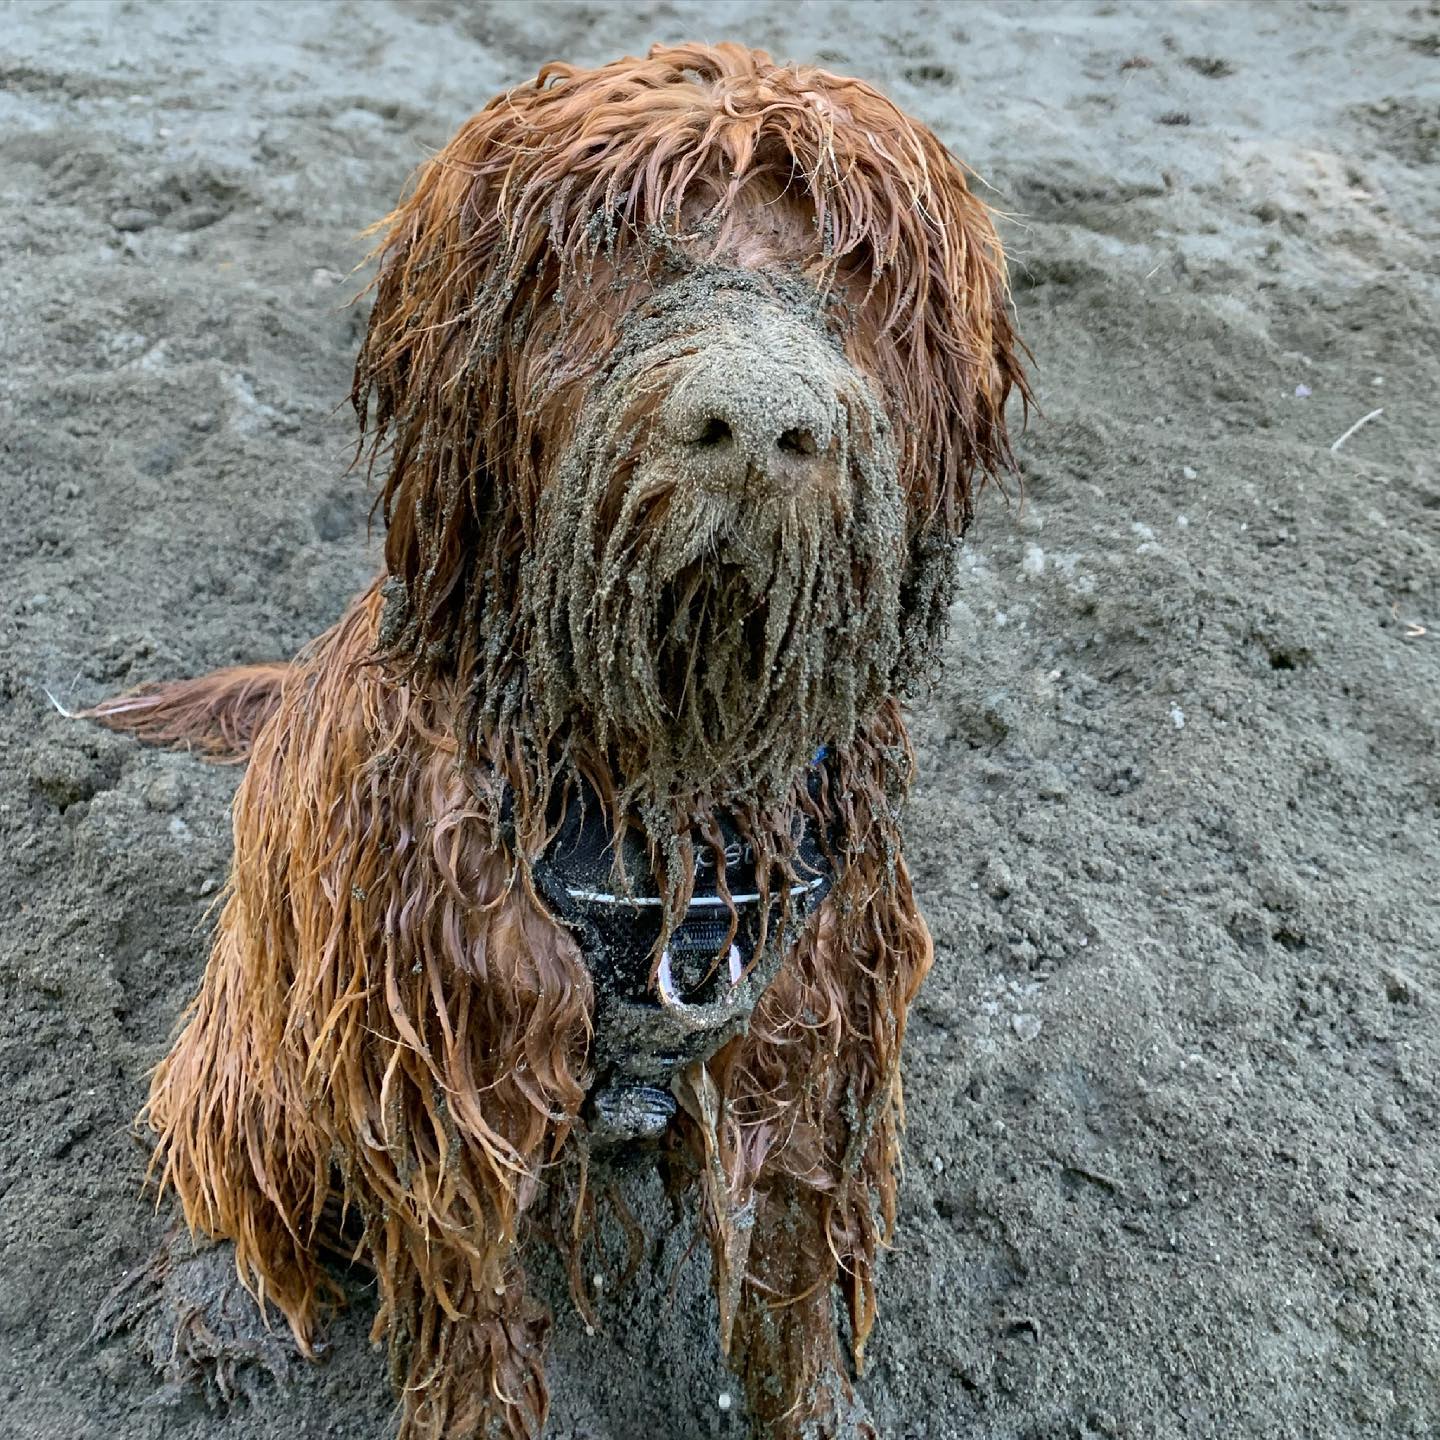 Oh my. This was @rusty.the.dog.yyj today after a play at Thetis Lake. Yeesh. #labradoodle #australianlabradoodle #sunvalleylabradoodles #puppy #yyj #dogsofinstagram #dogsofig #rustydoodle #thedood